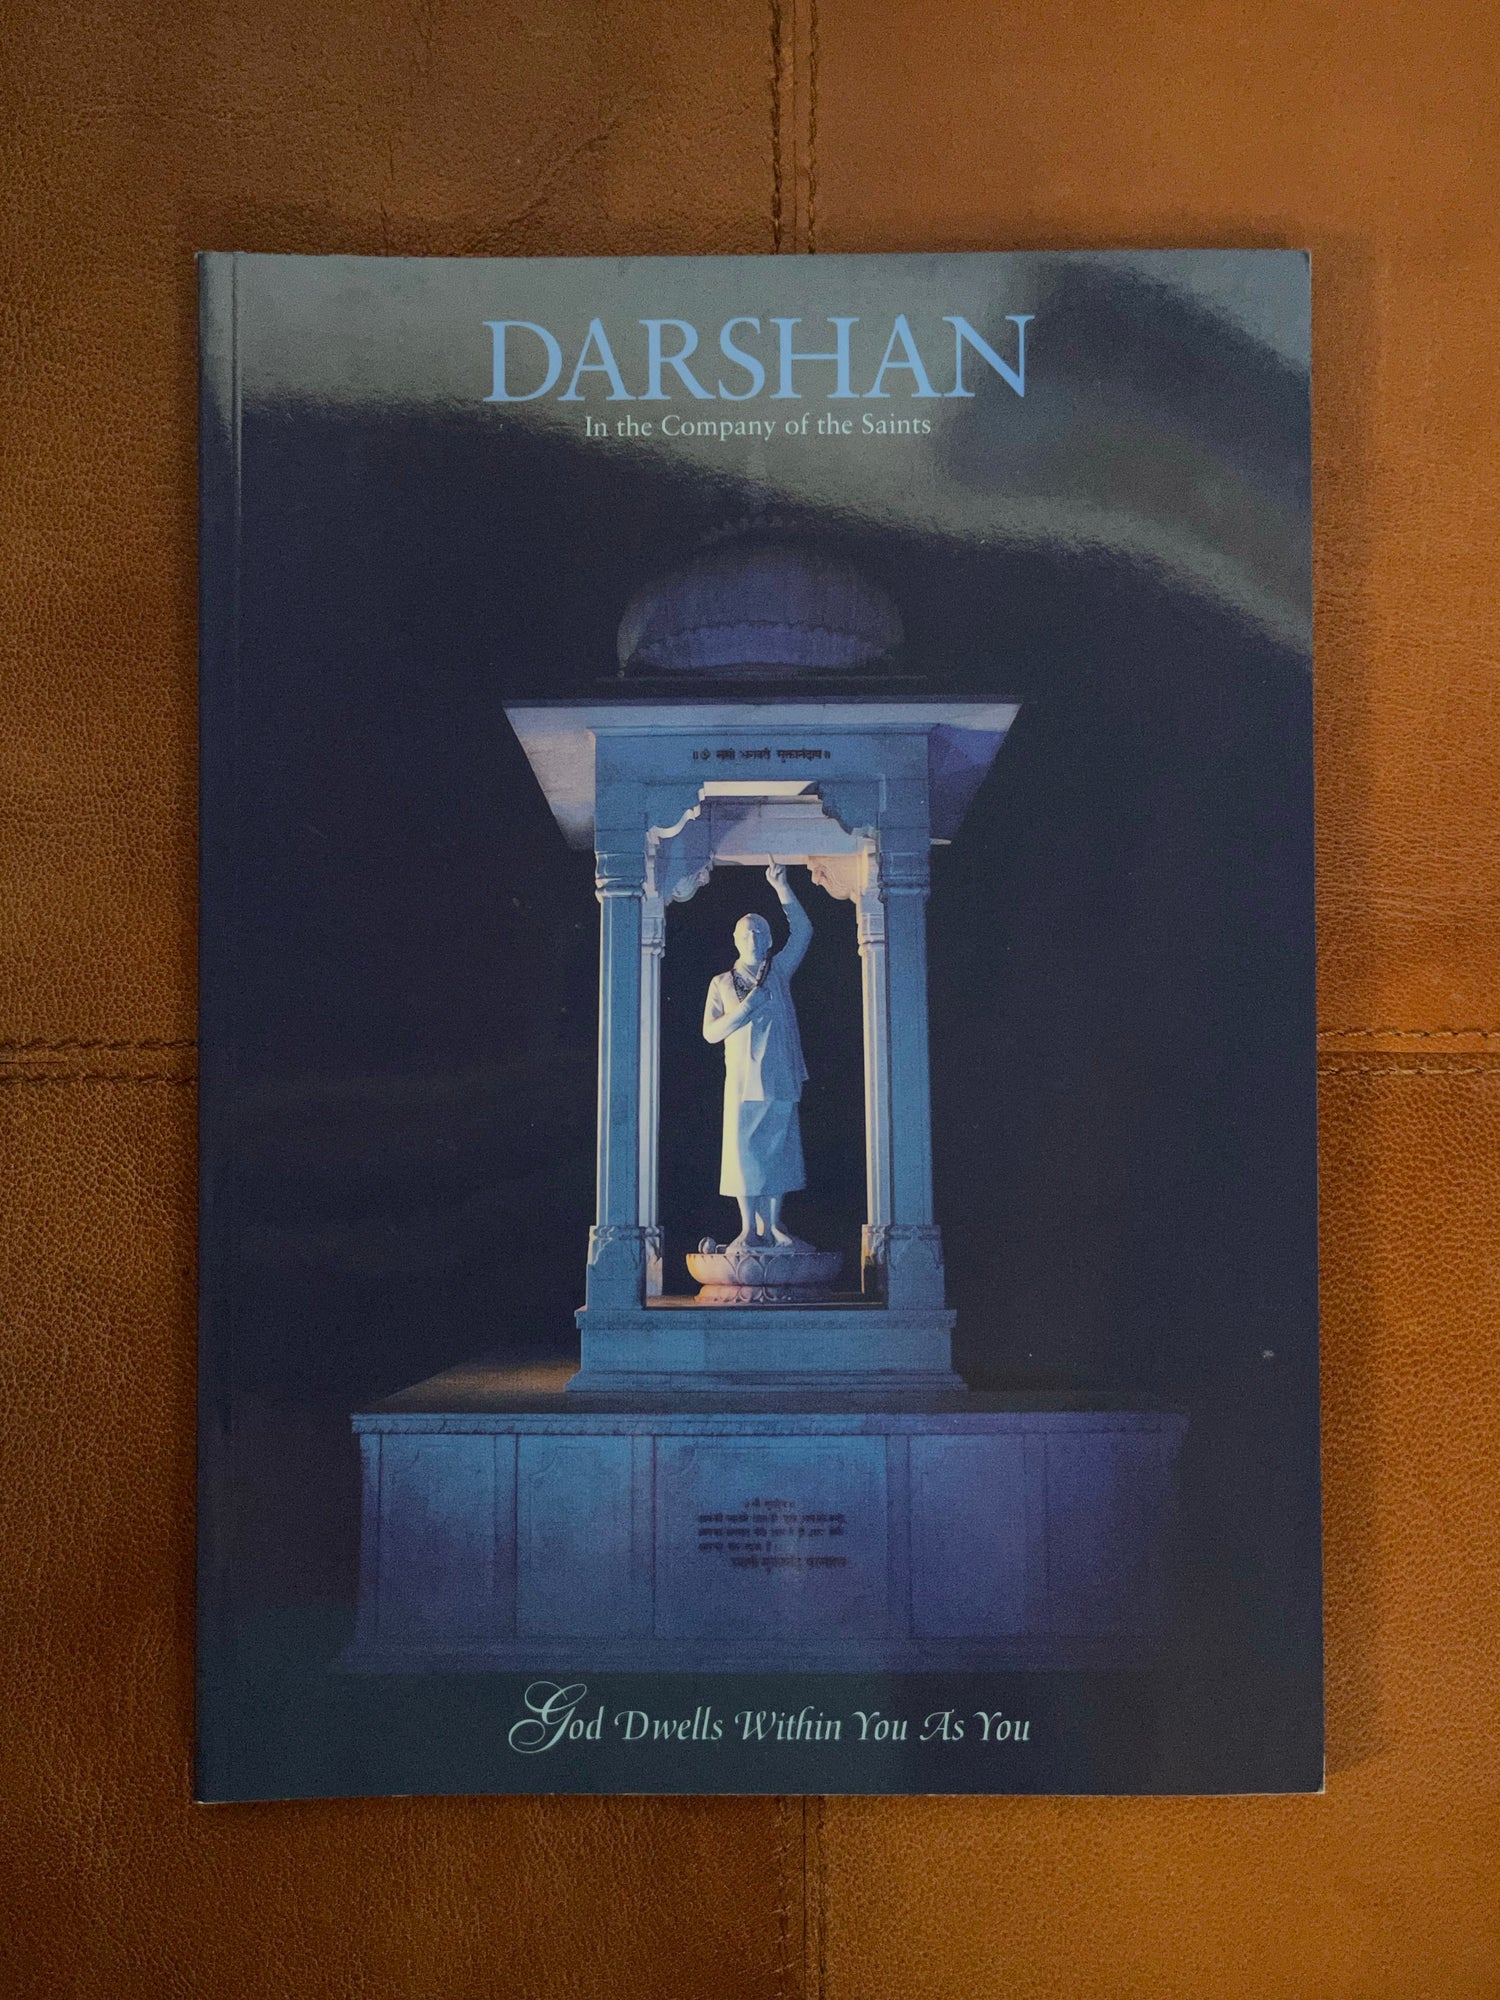 Darshan Magazine, In The Company of The Saints, God Dwells Within You as You